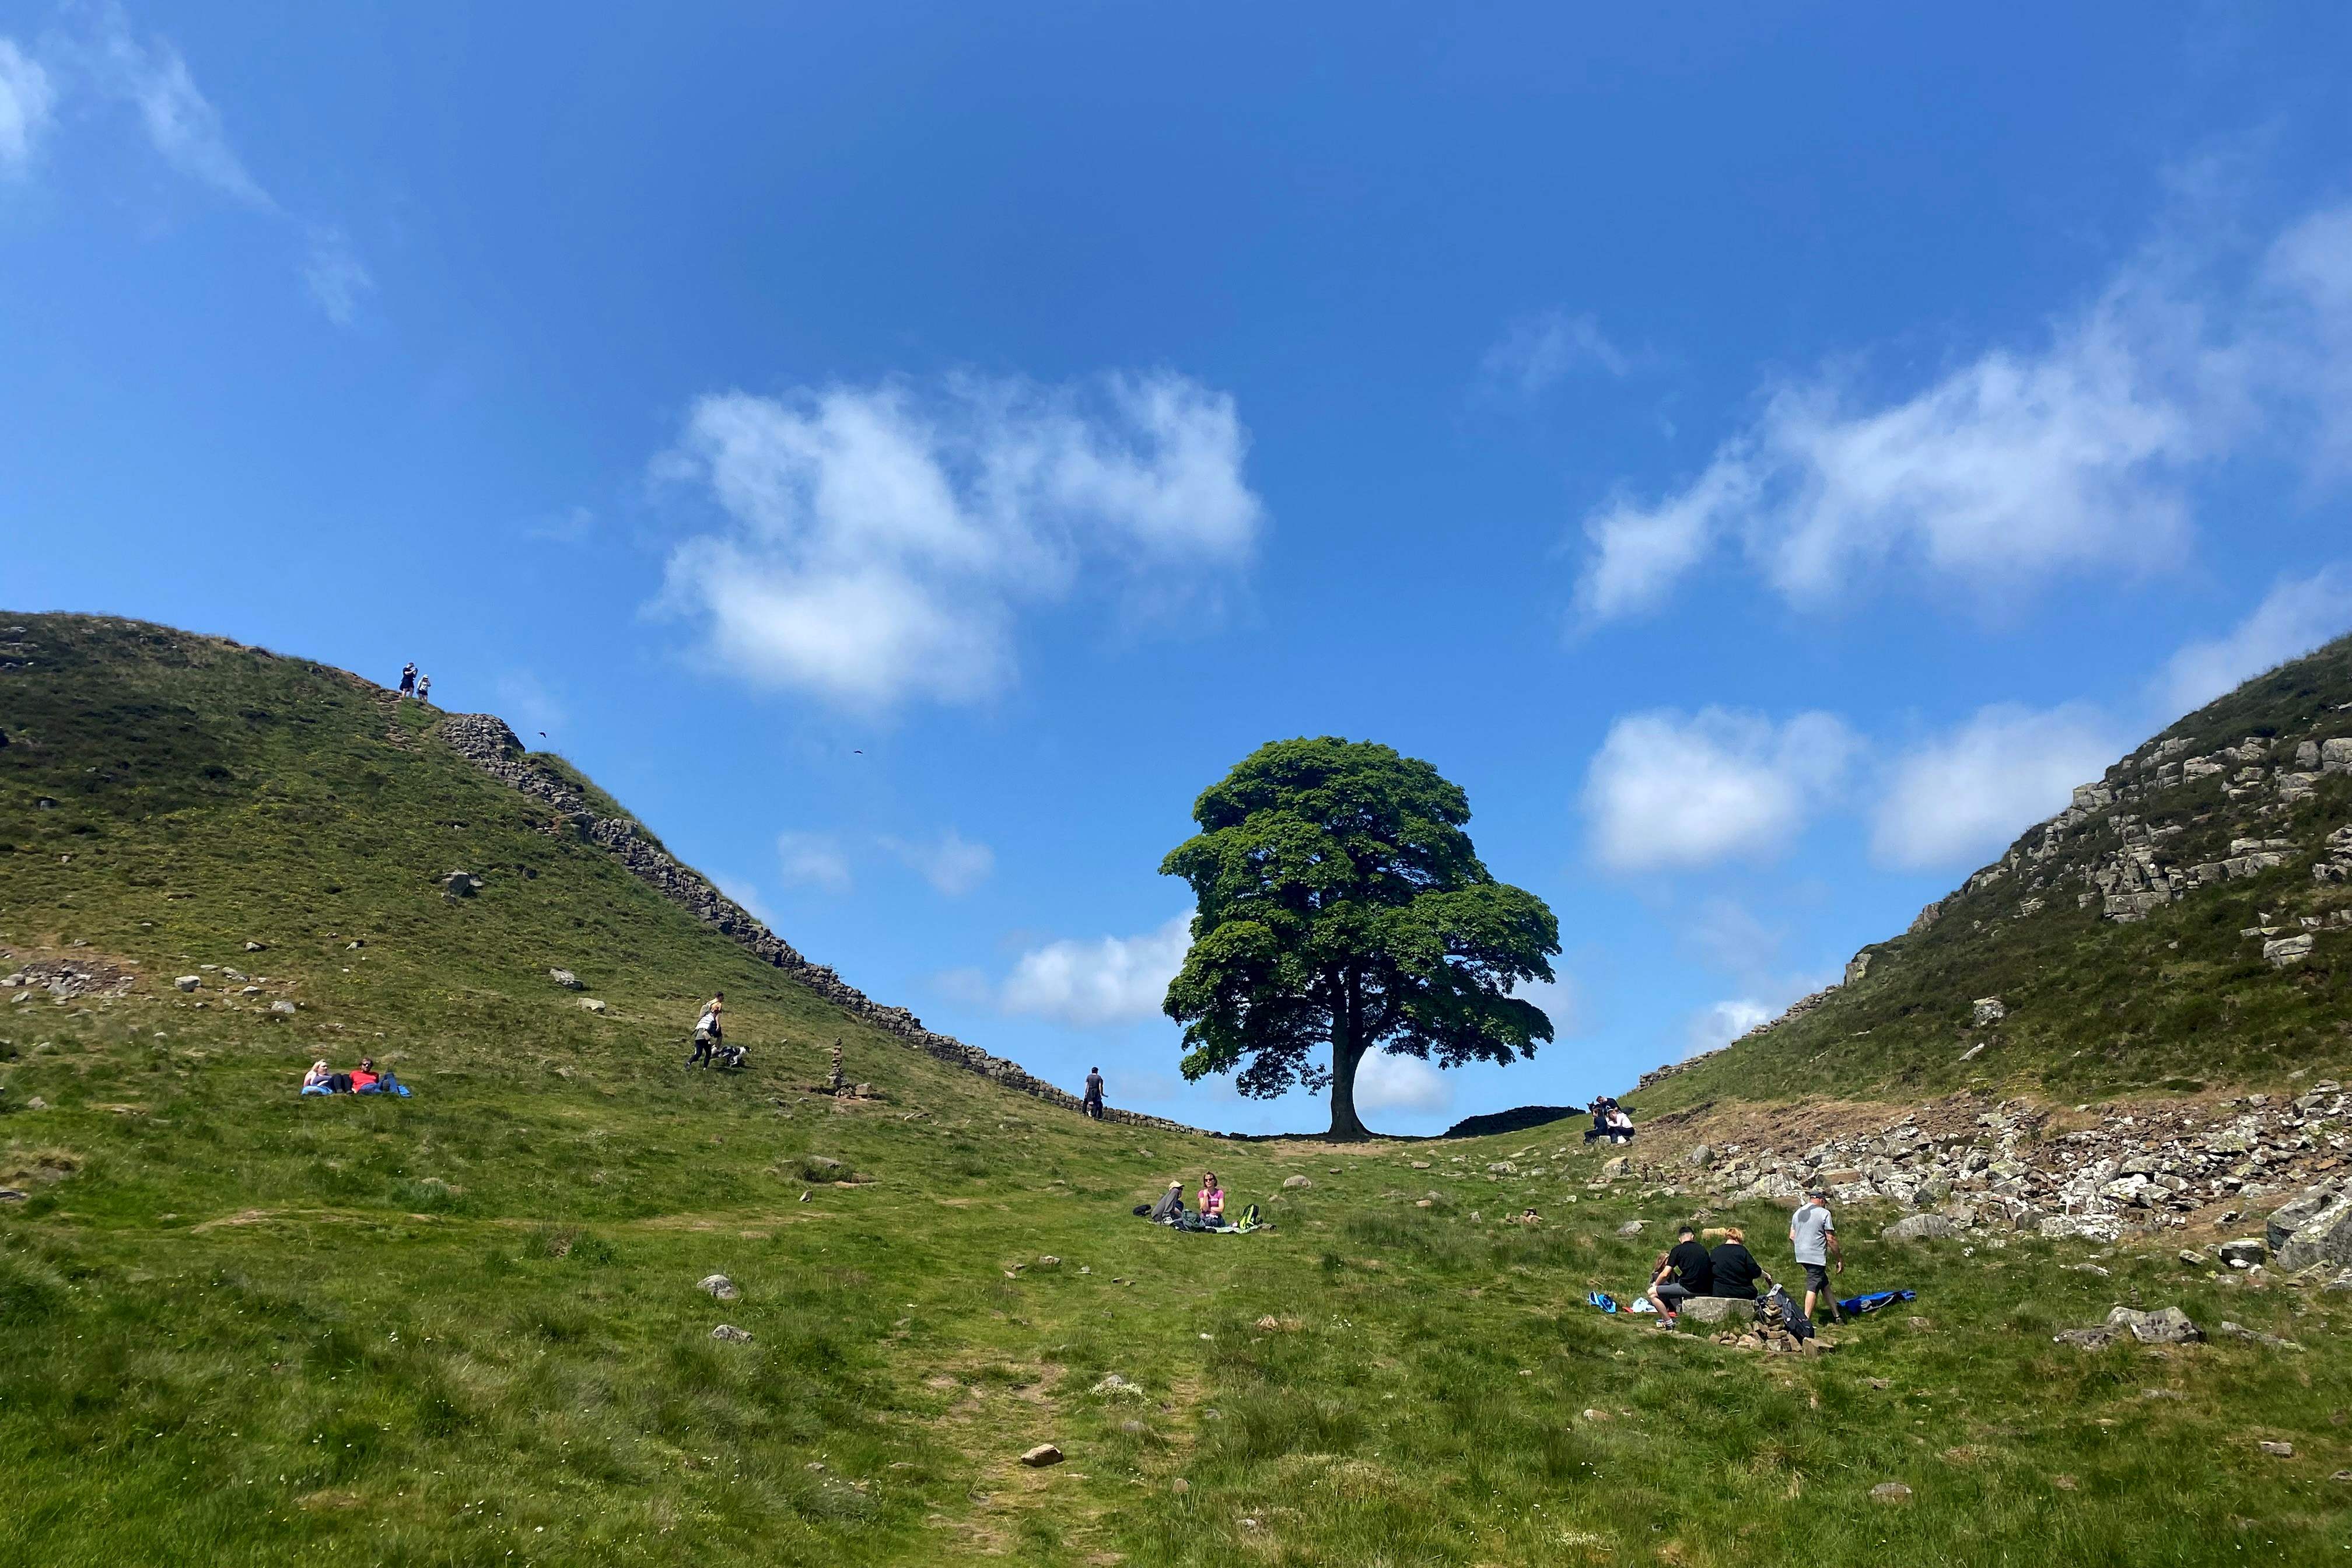 The Sycamore Gap tree standing majestically before it was felled